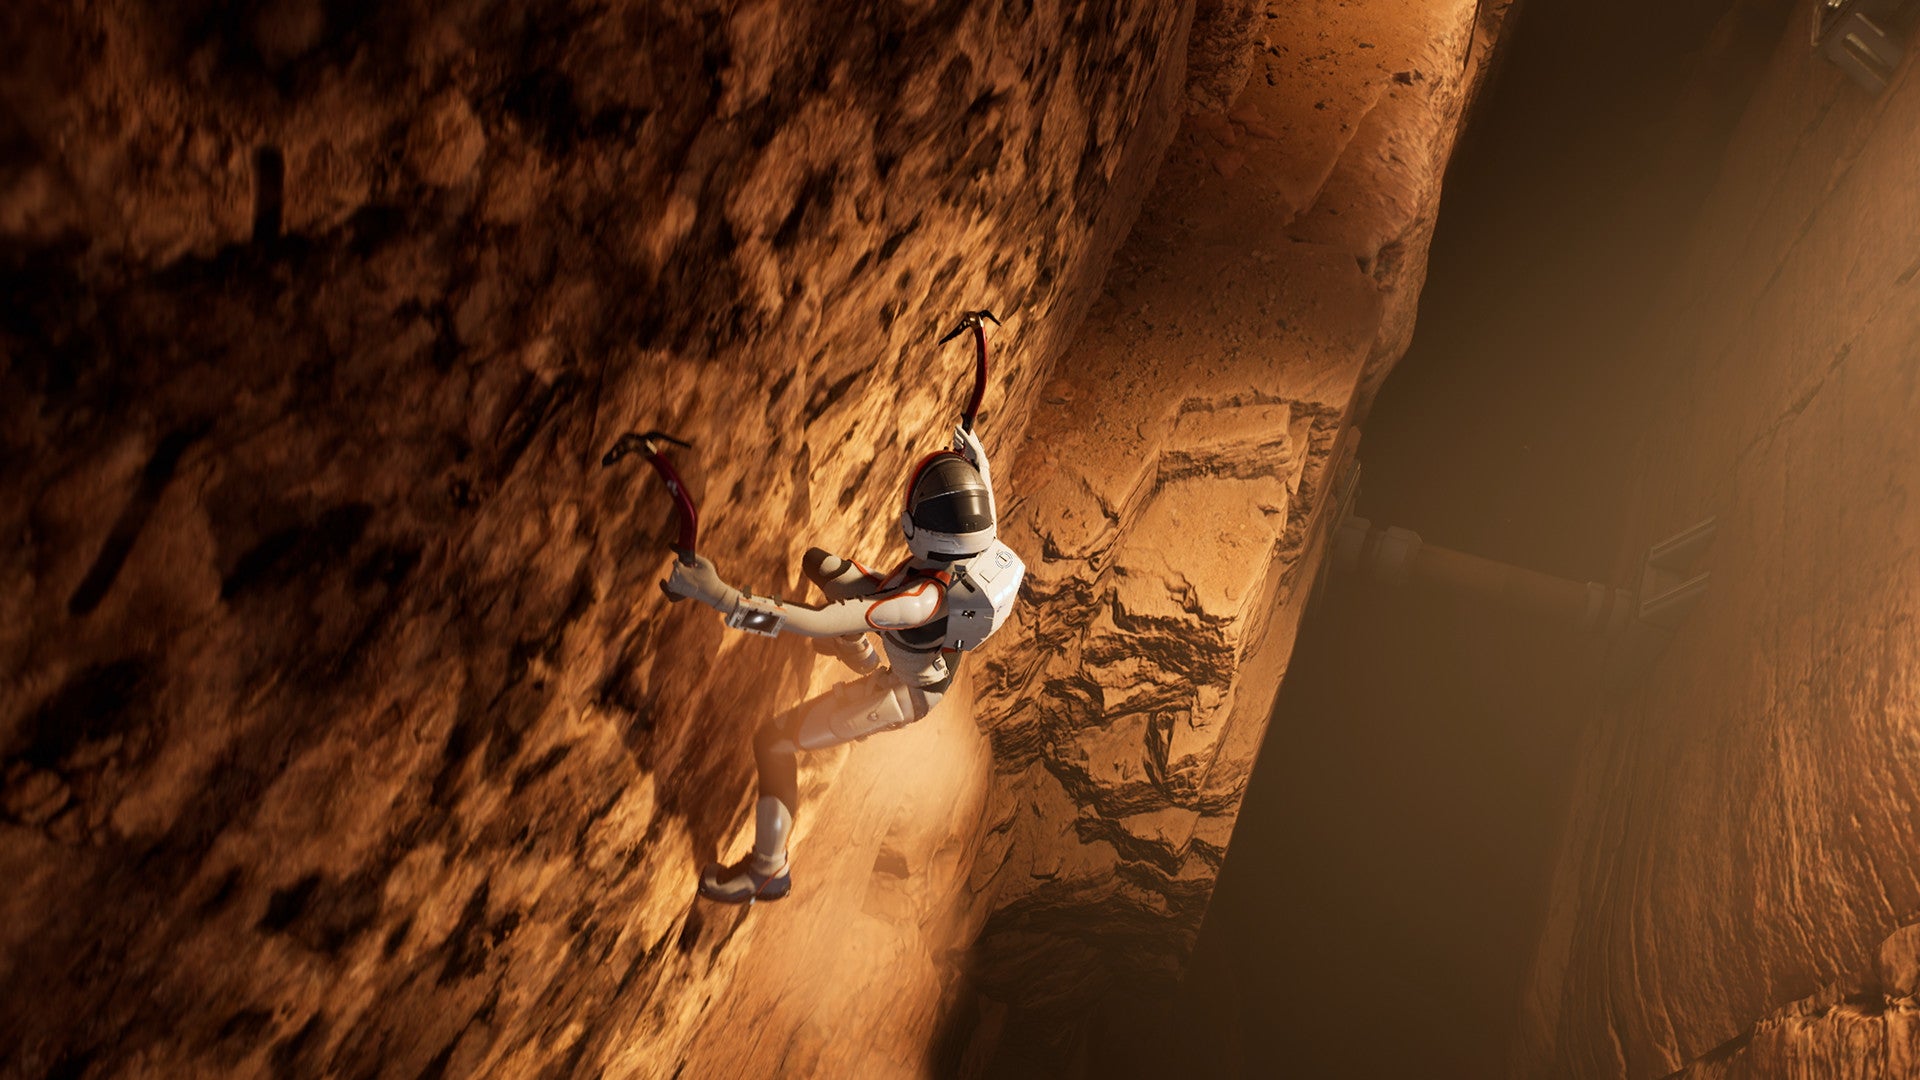 An astronaut uses pick axes to climb a dusty cliff face in Deliver Us Mars